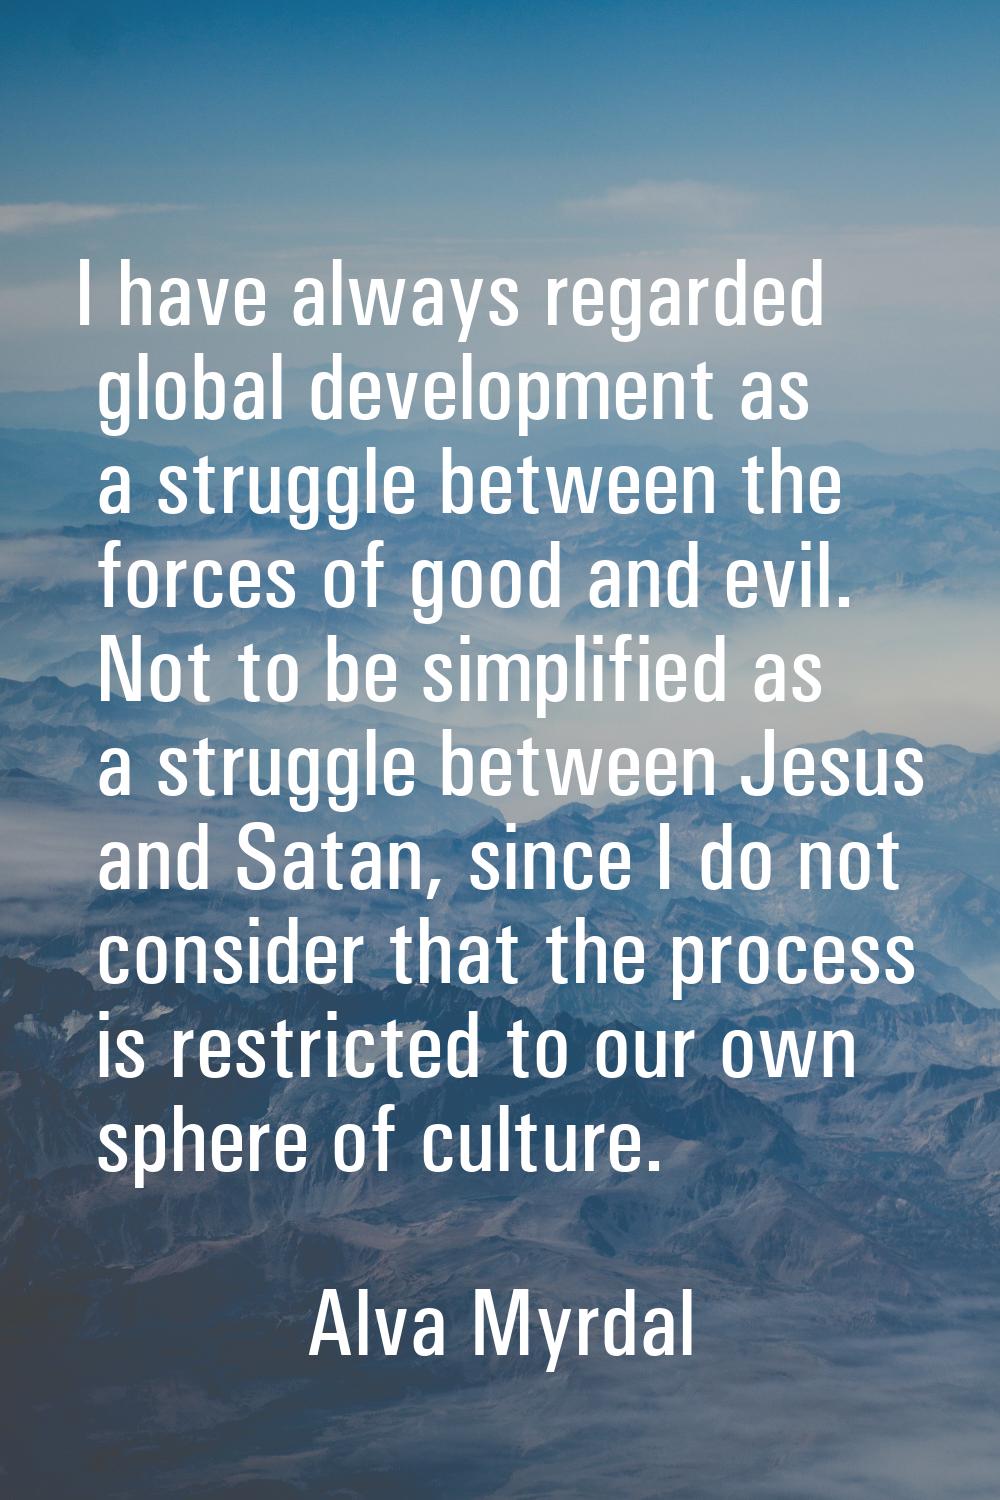 I have always regarded global development as a struggle between the forces of good and evil. Not to